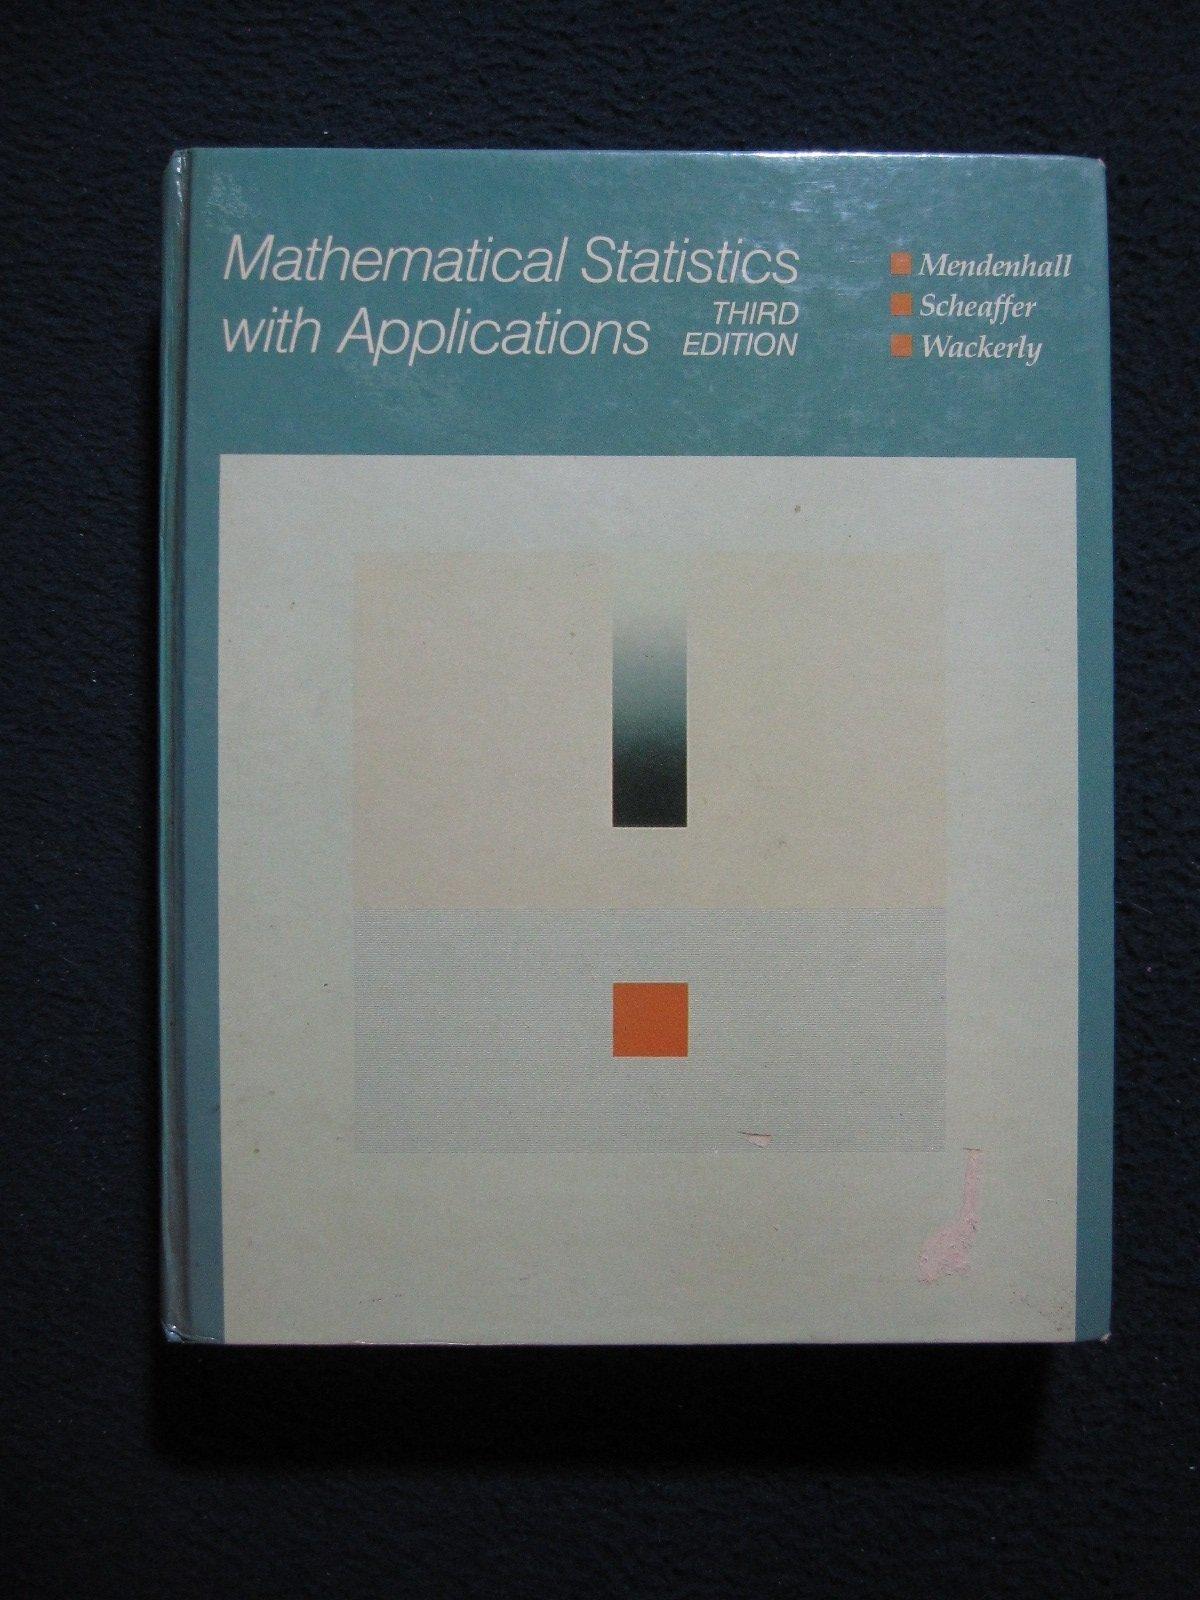 mathematical statistics with applications 3rd edition william mendenhall 0871509393, 9780871509390